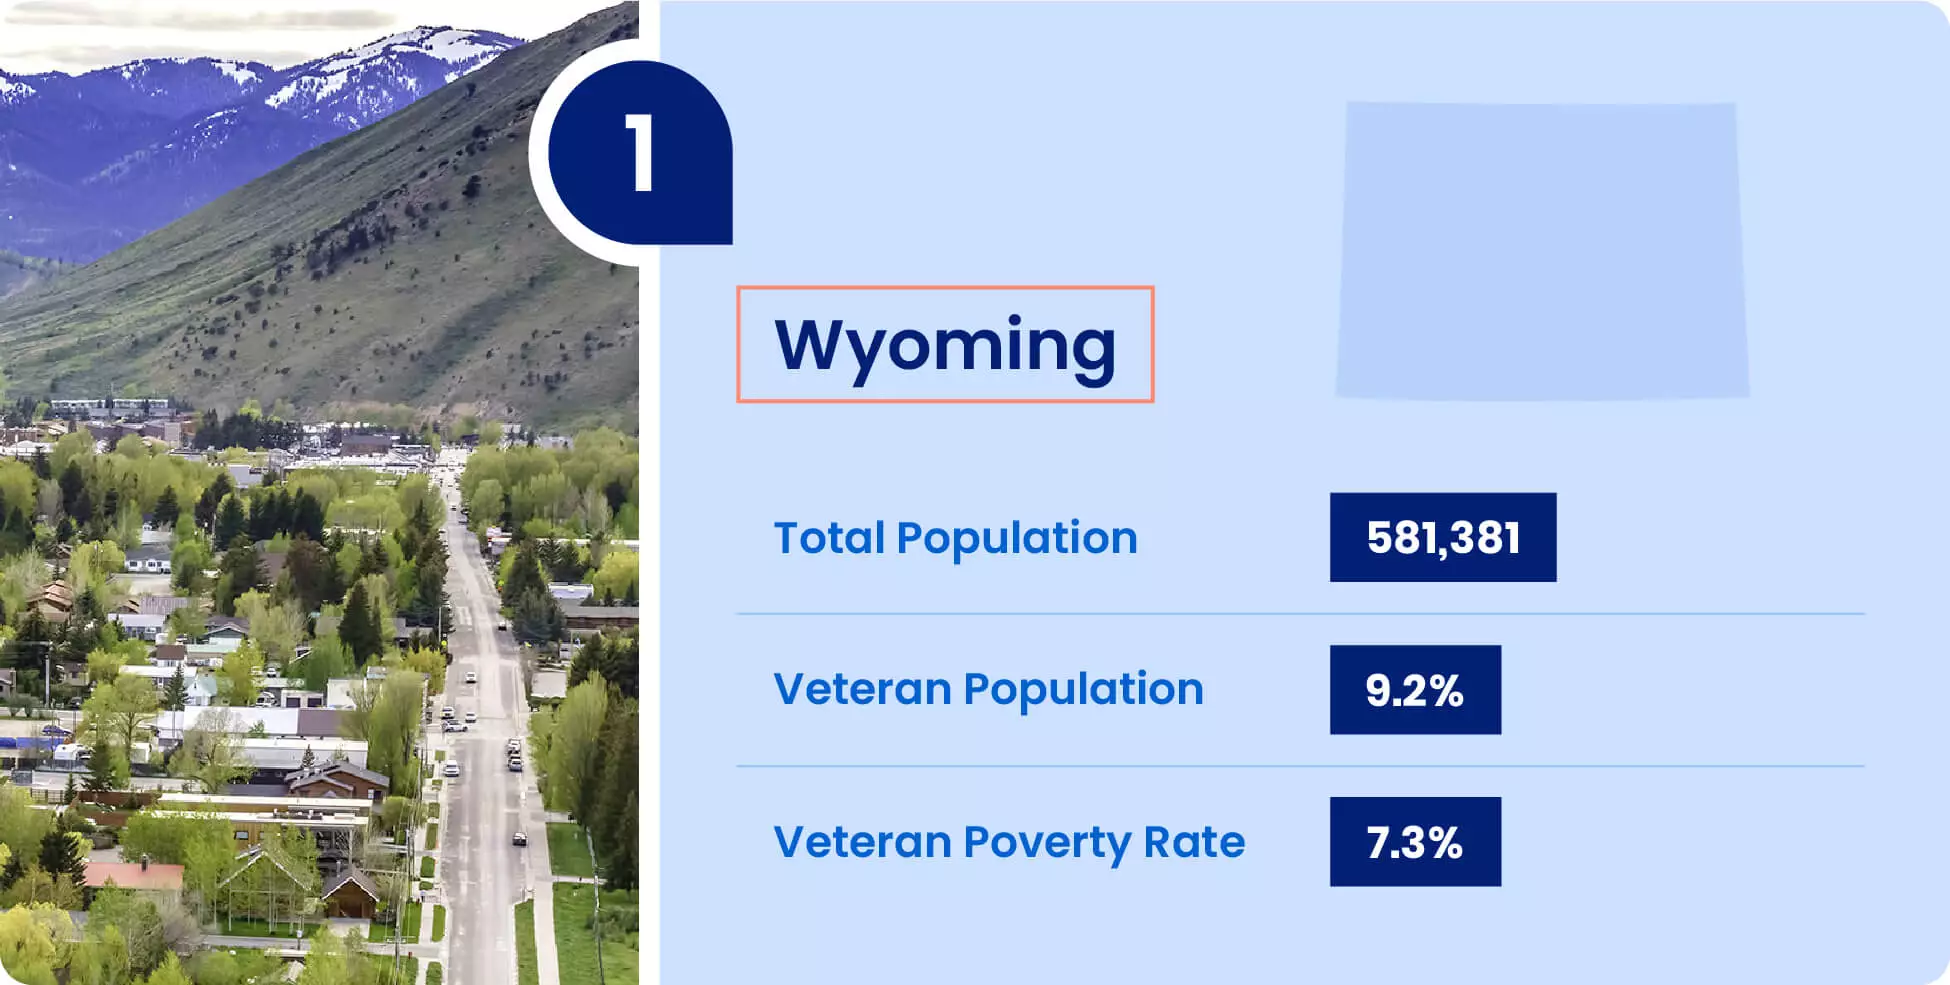 Image shows key information for military retirees thinking of moving to Wyoming.